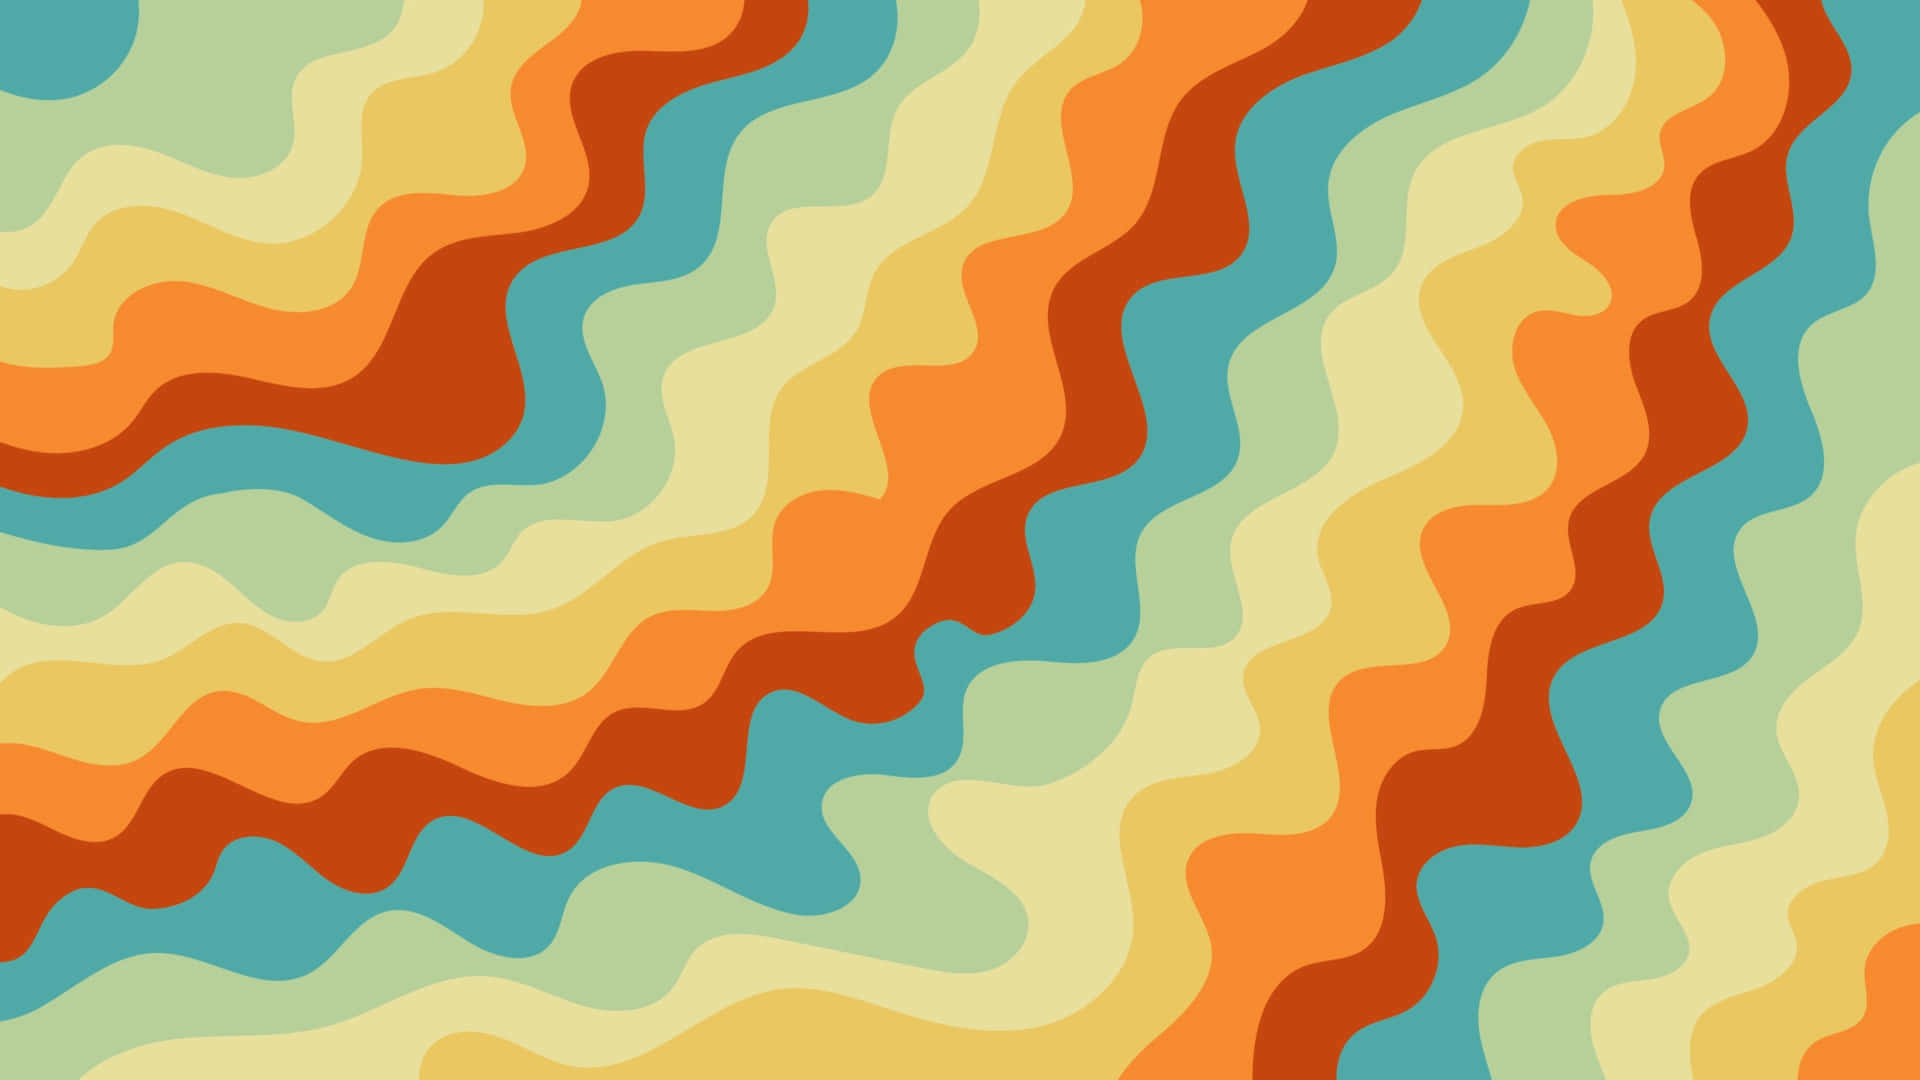 A Colorful Wave Pattern With Orange, Blue, And Green Colors